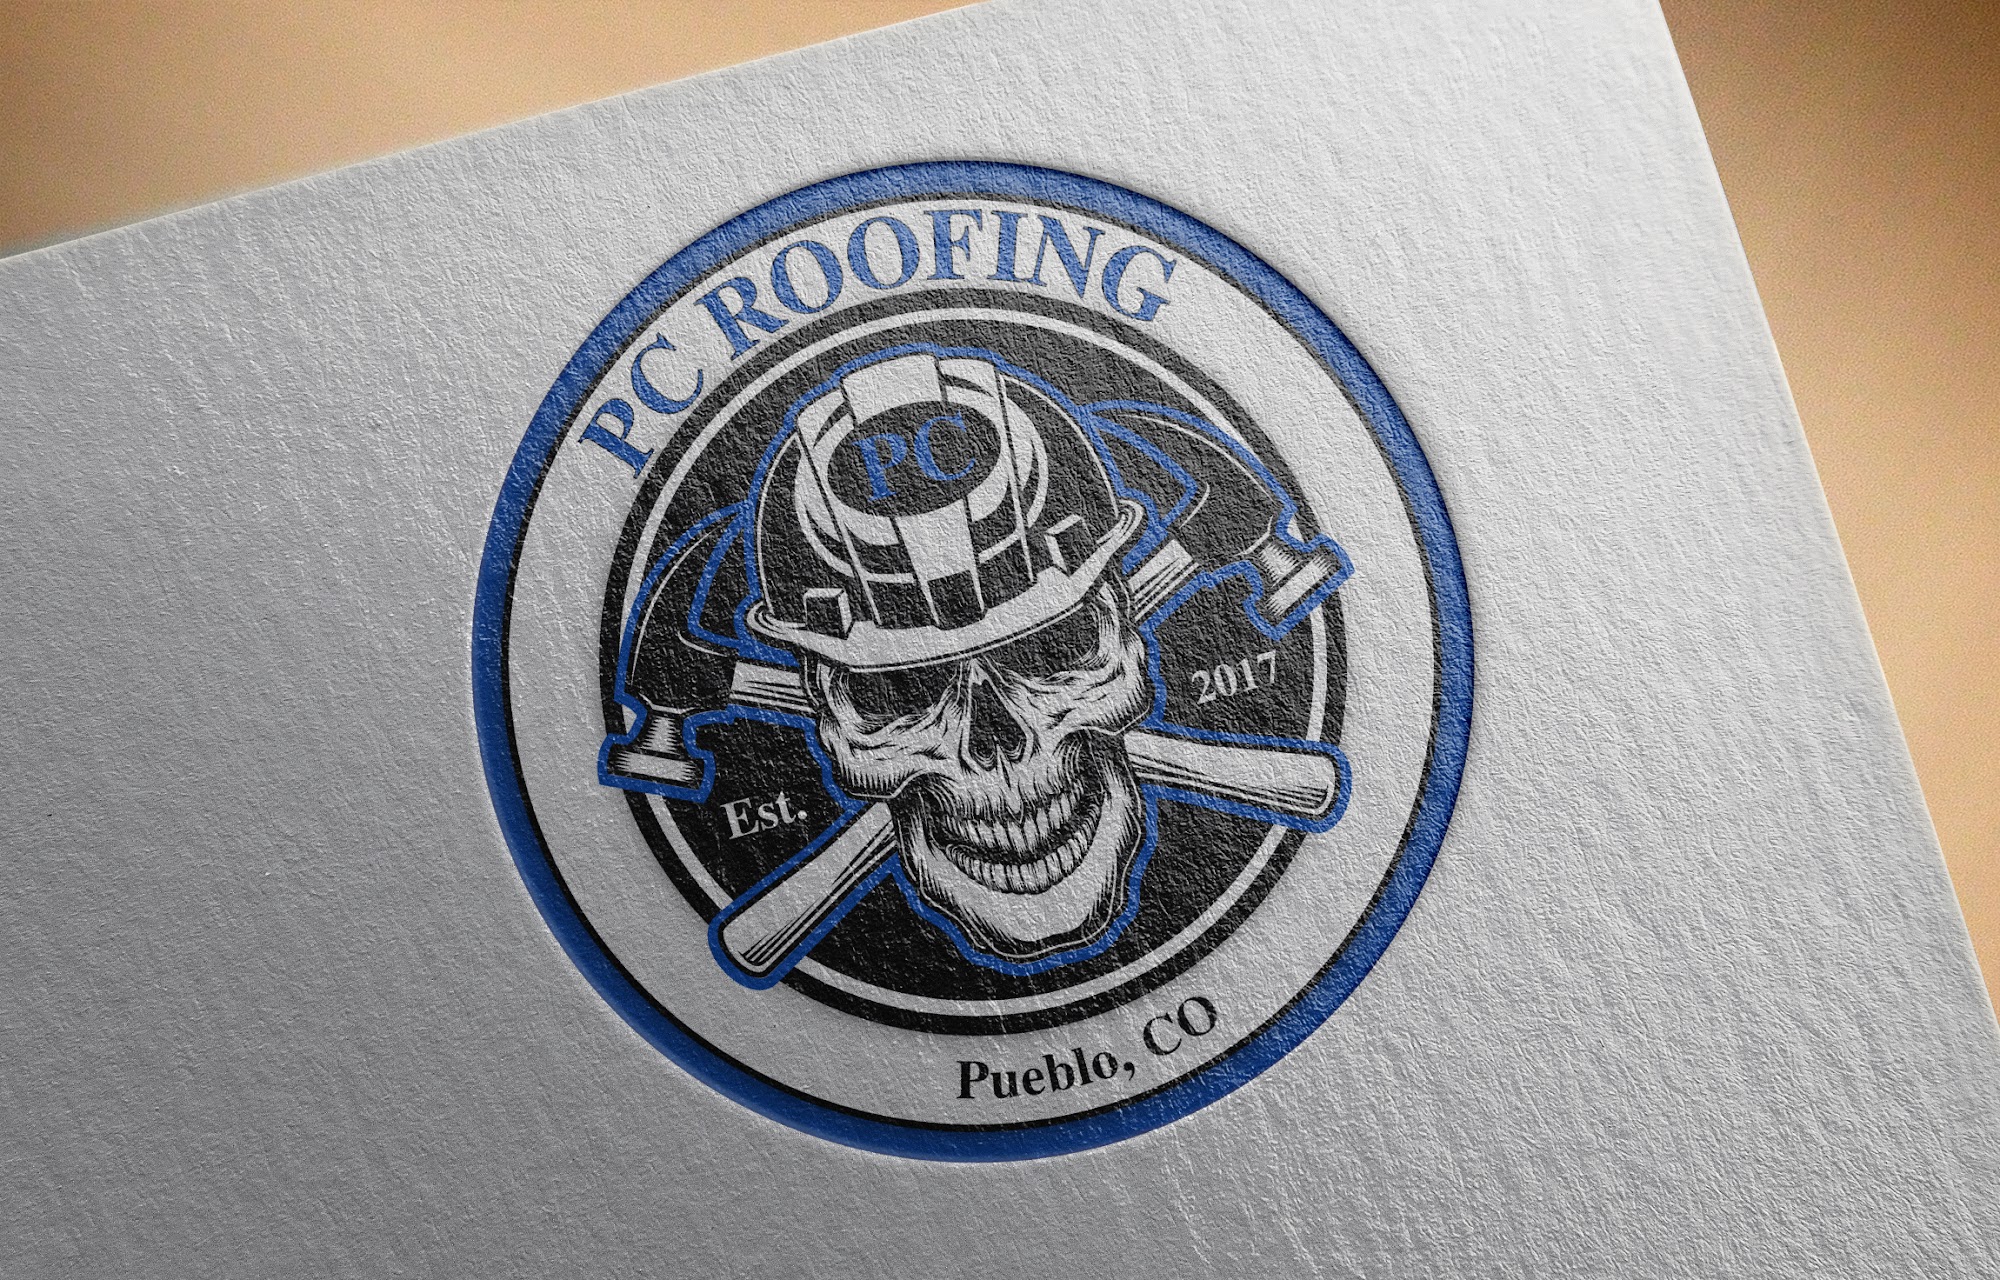 PC Roofing and Gutters